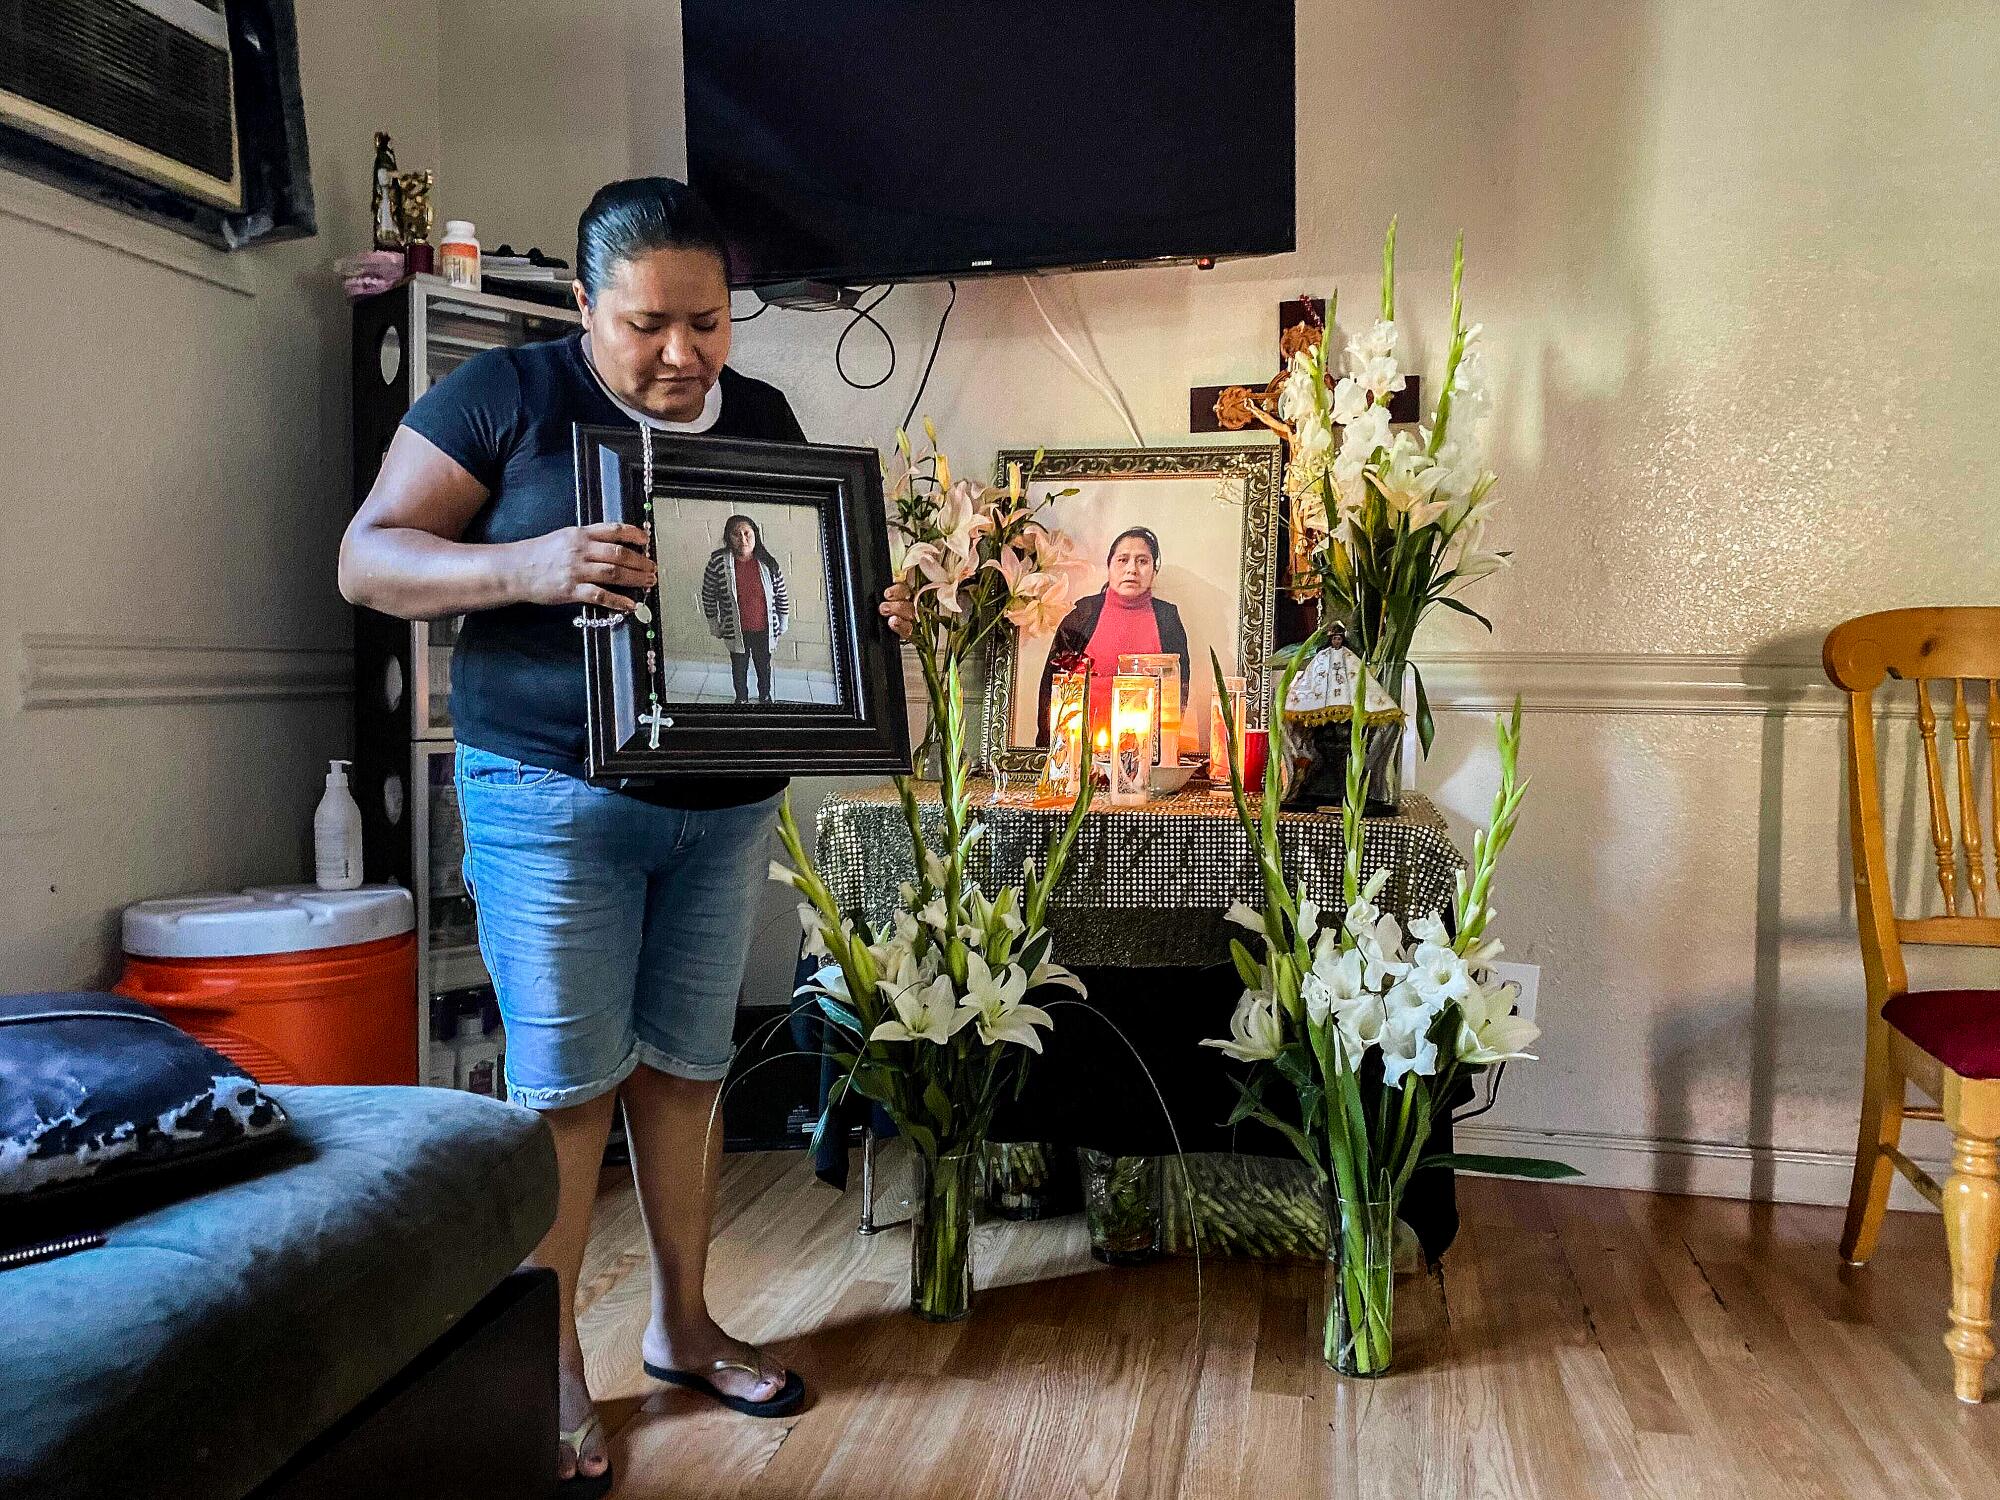 Maria Eugenia Chavez Segovia's sister Gabriela clutches a picture of her at her home in northern California.